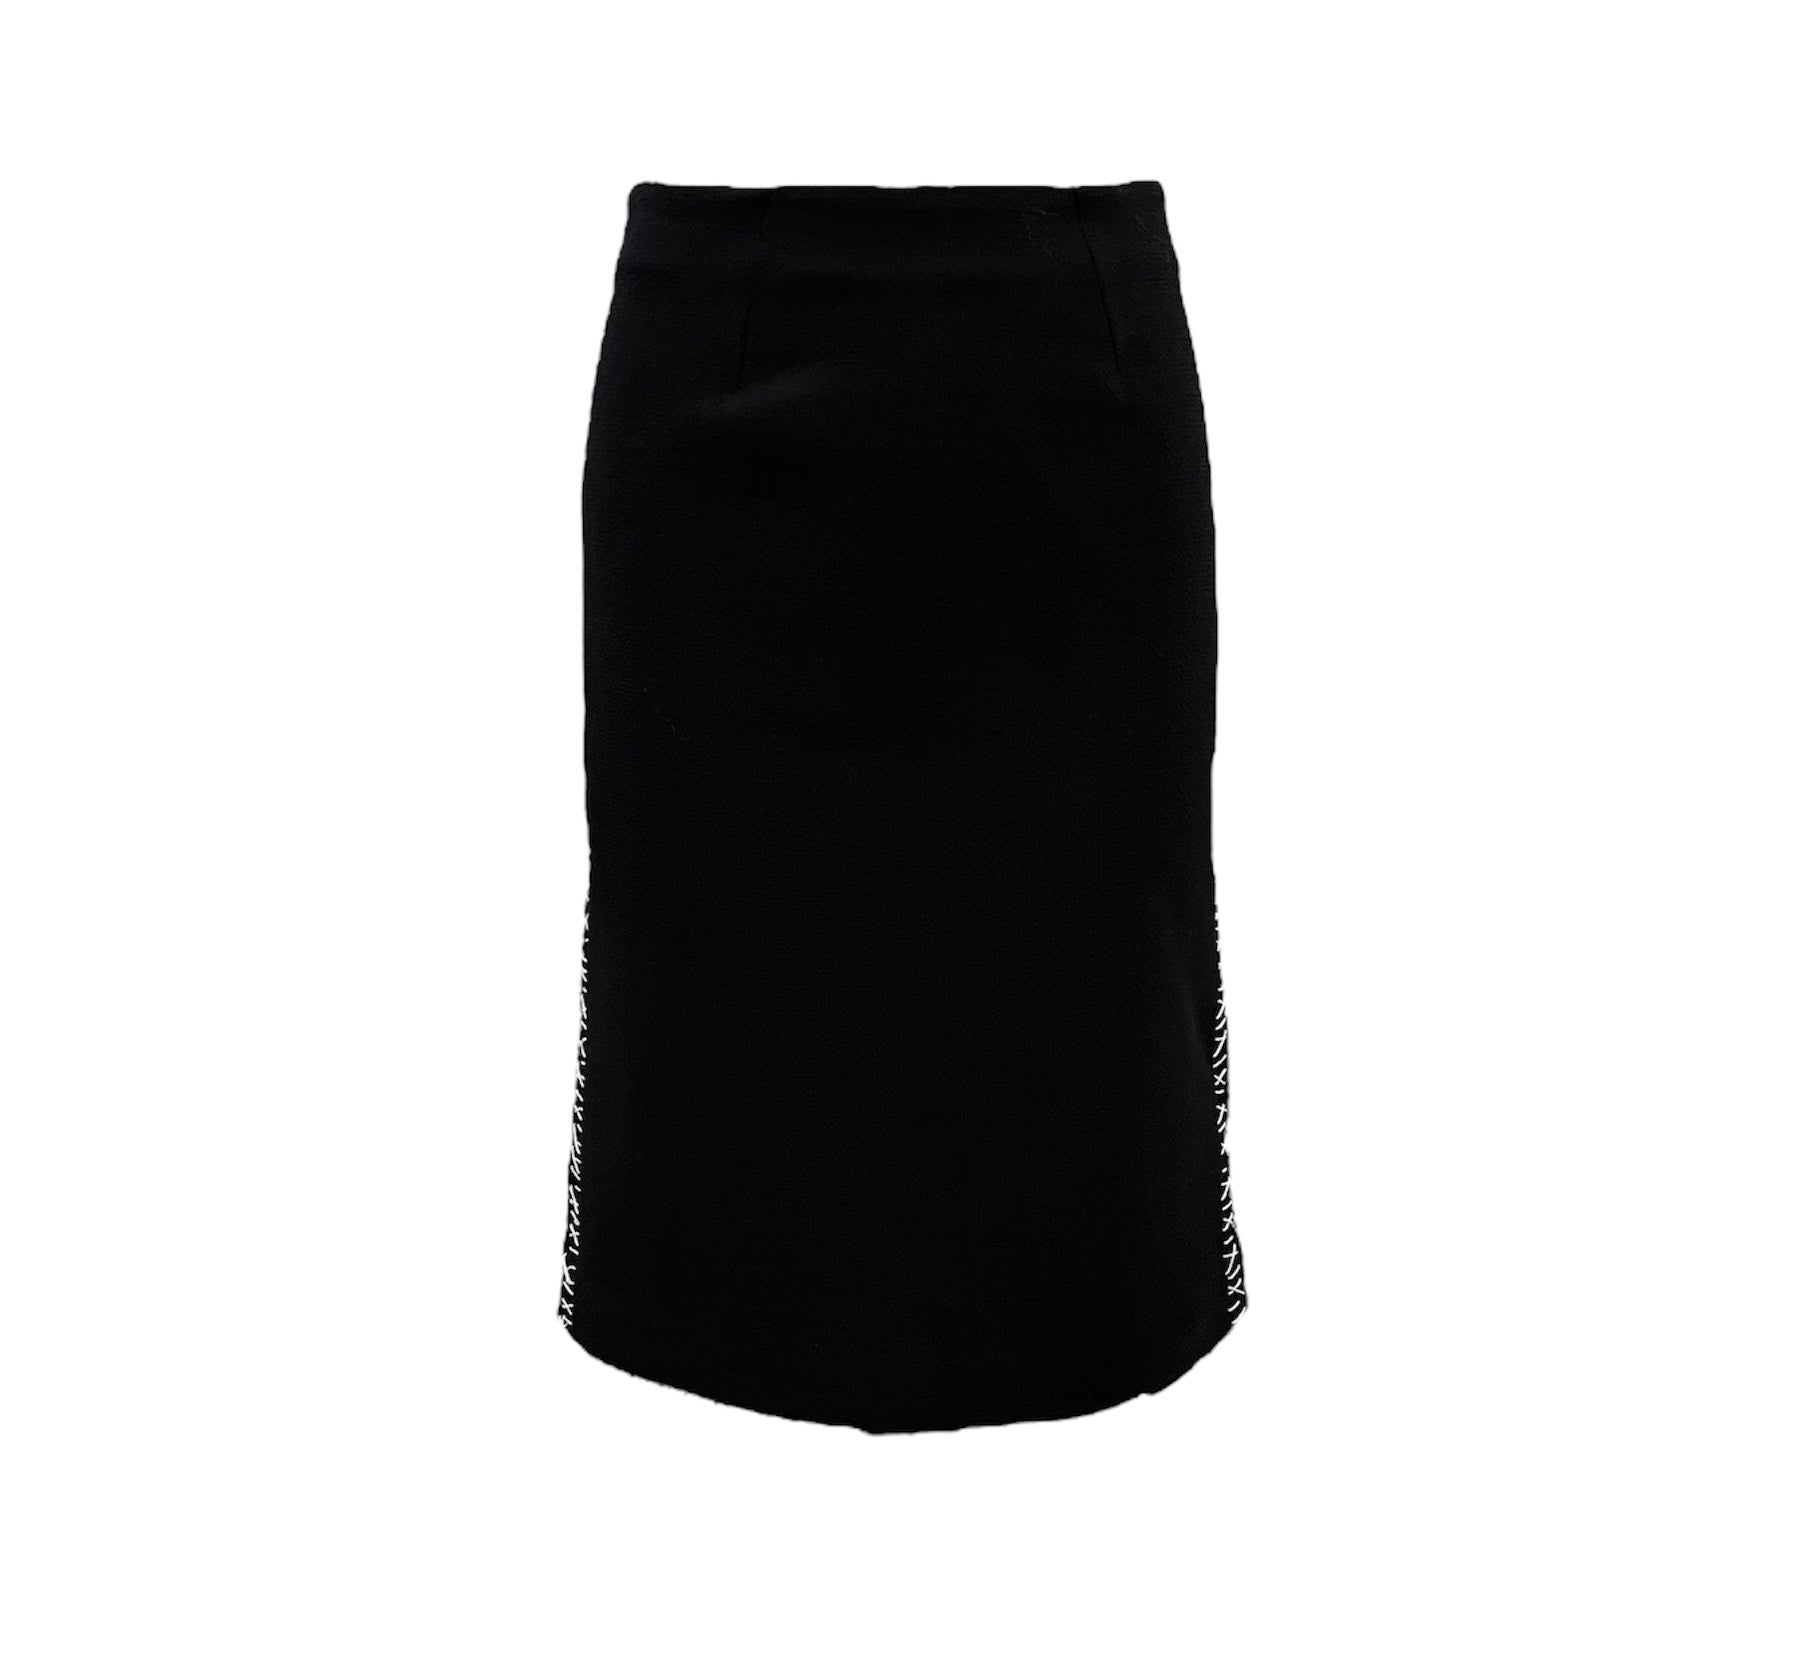 Alexander McQueen Spring/Summer 2003 Black Wool Crepe Contrast Stitch Suit SKIRT FRONT  6 of 9